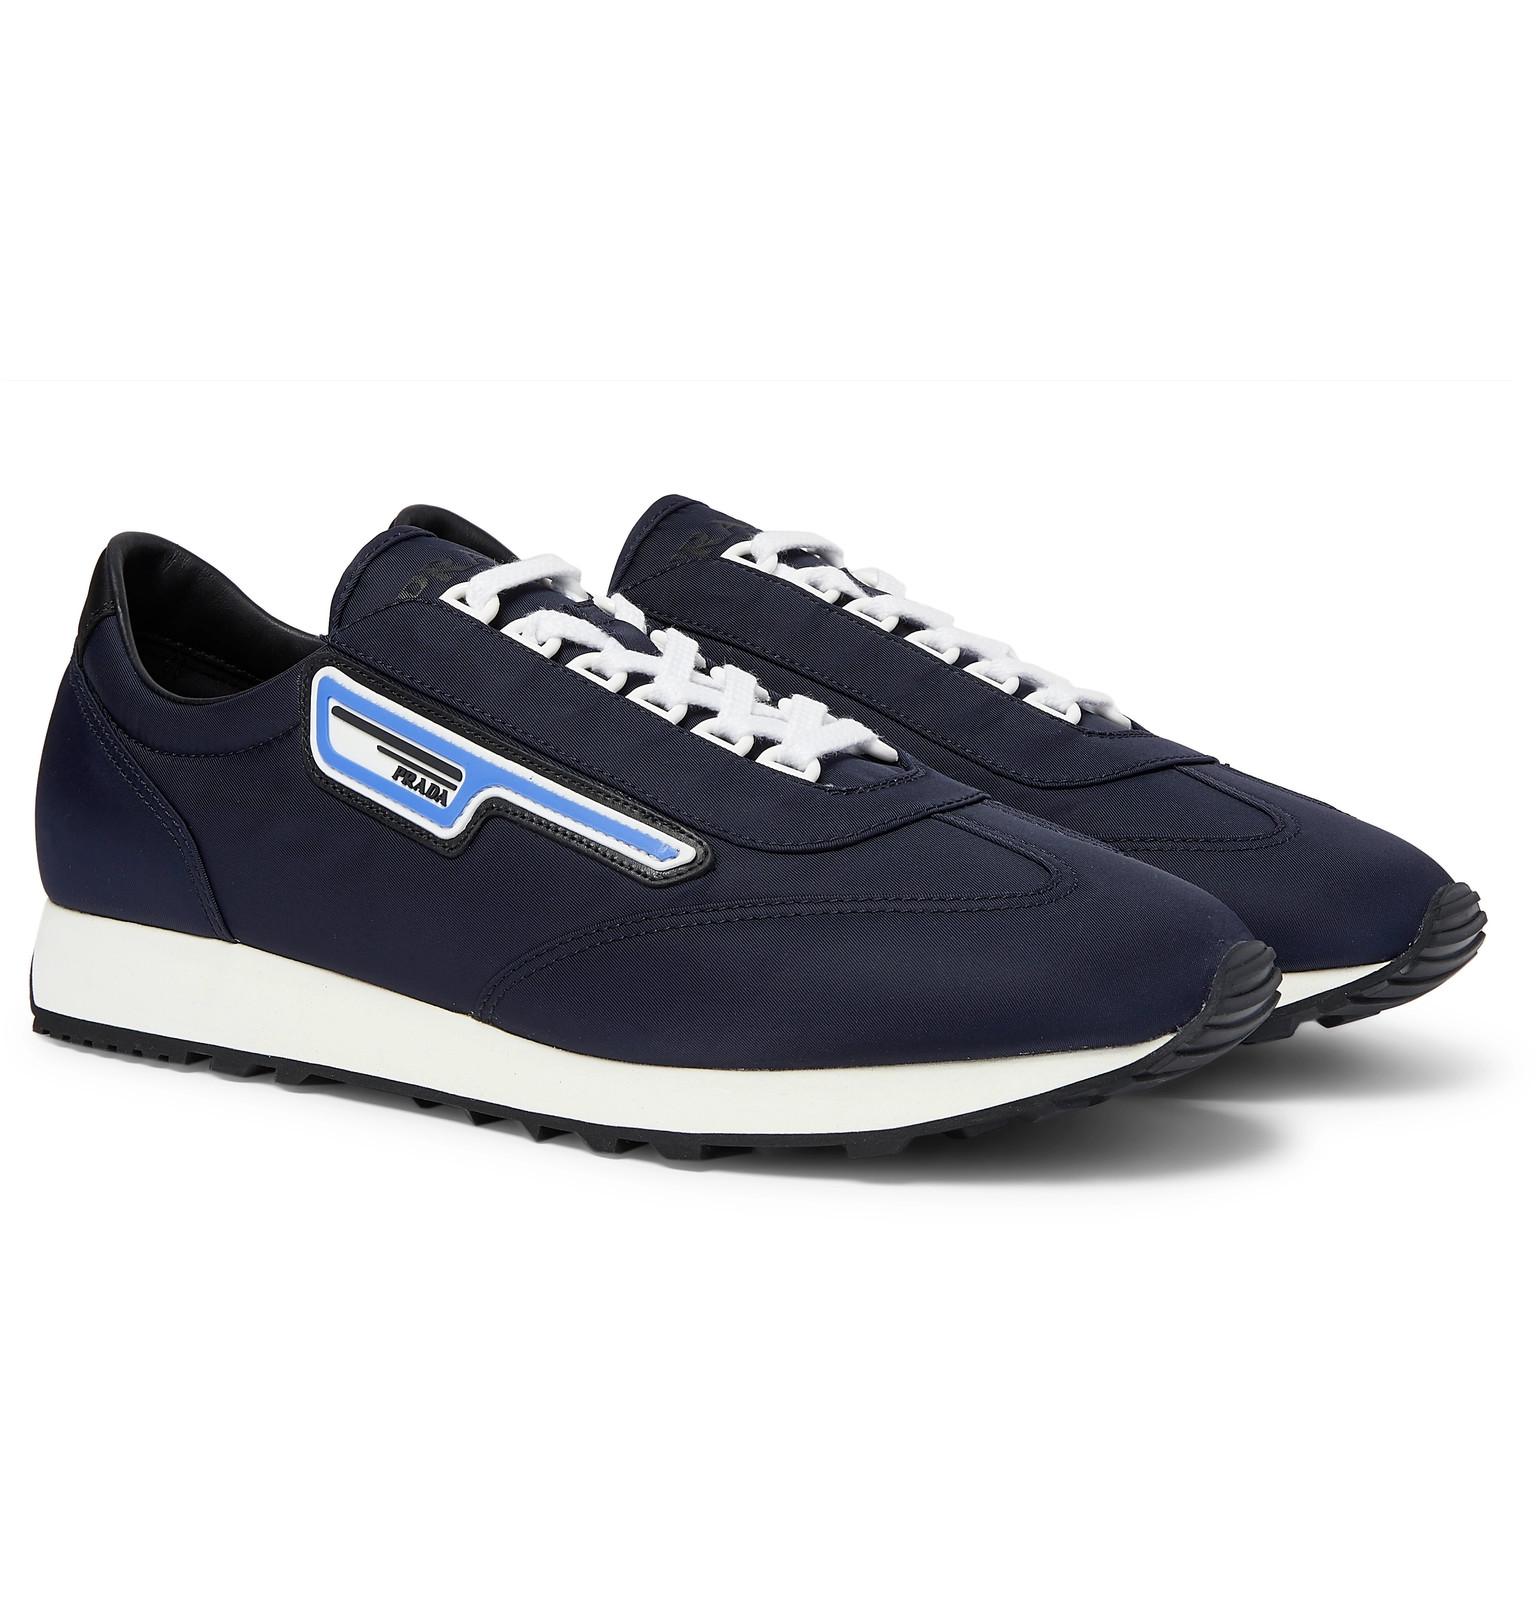 Prada Rubber Milano 70 Sneakers in Navy (Blue) for Men - Save 30% - Lyst